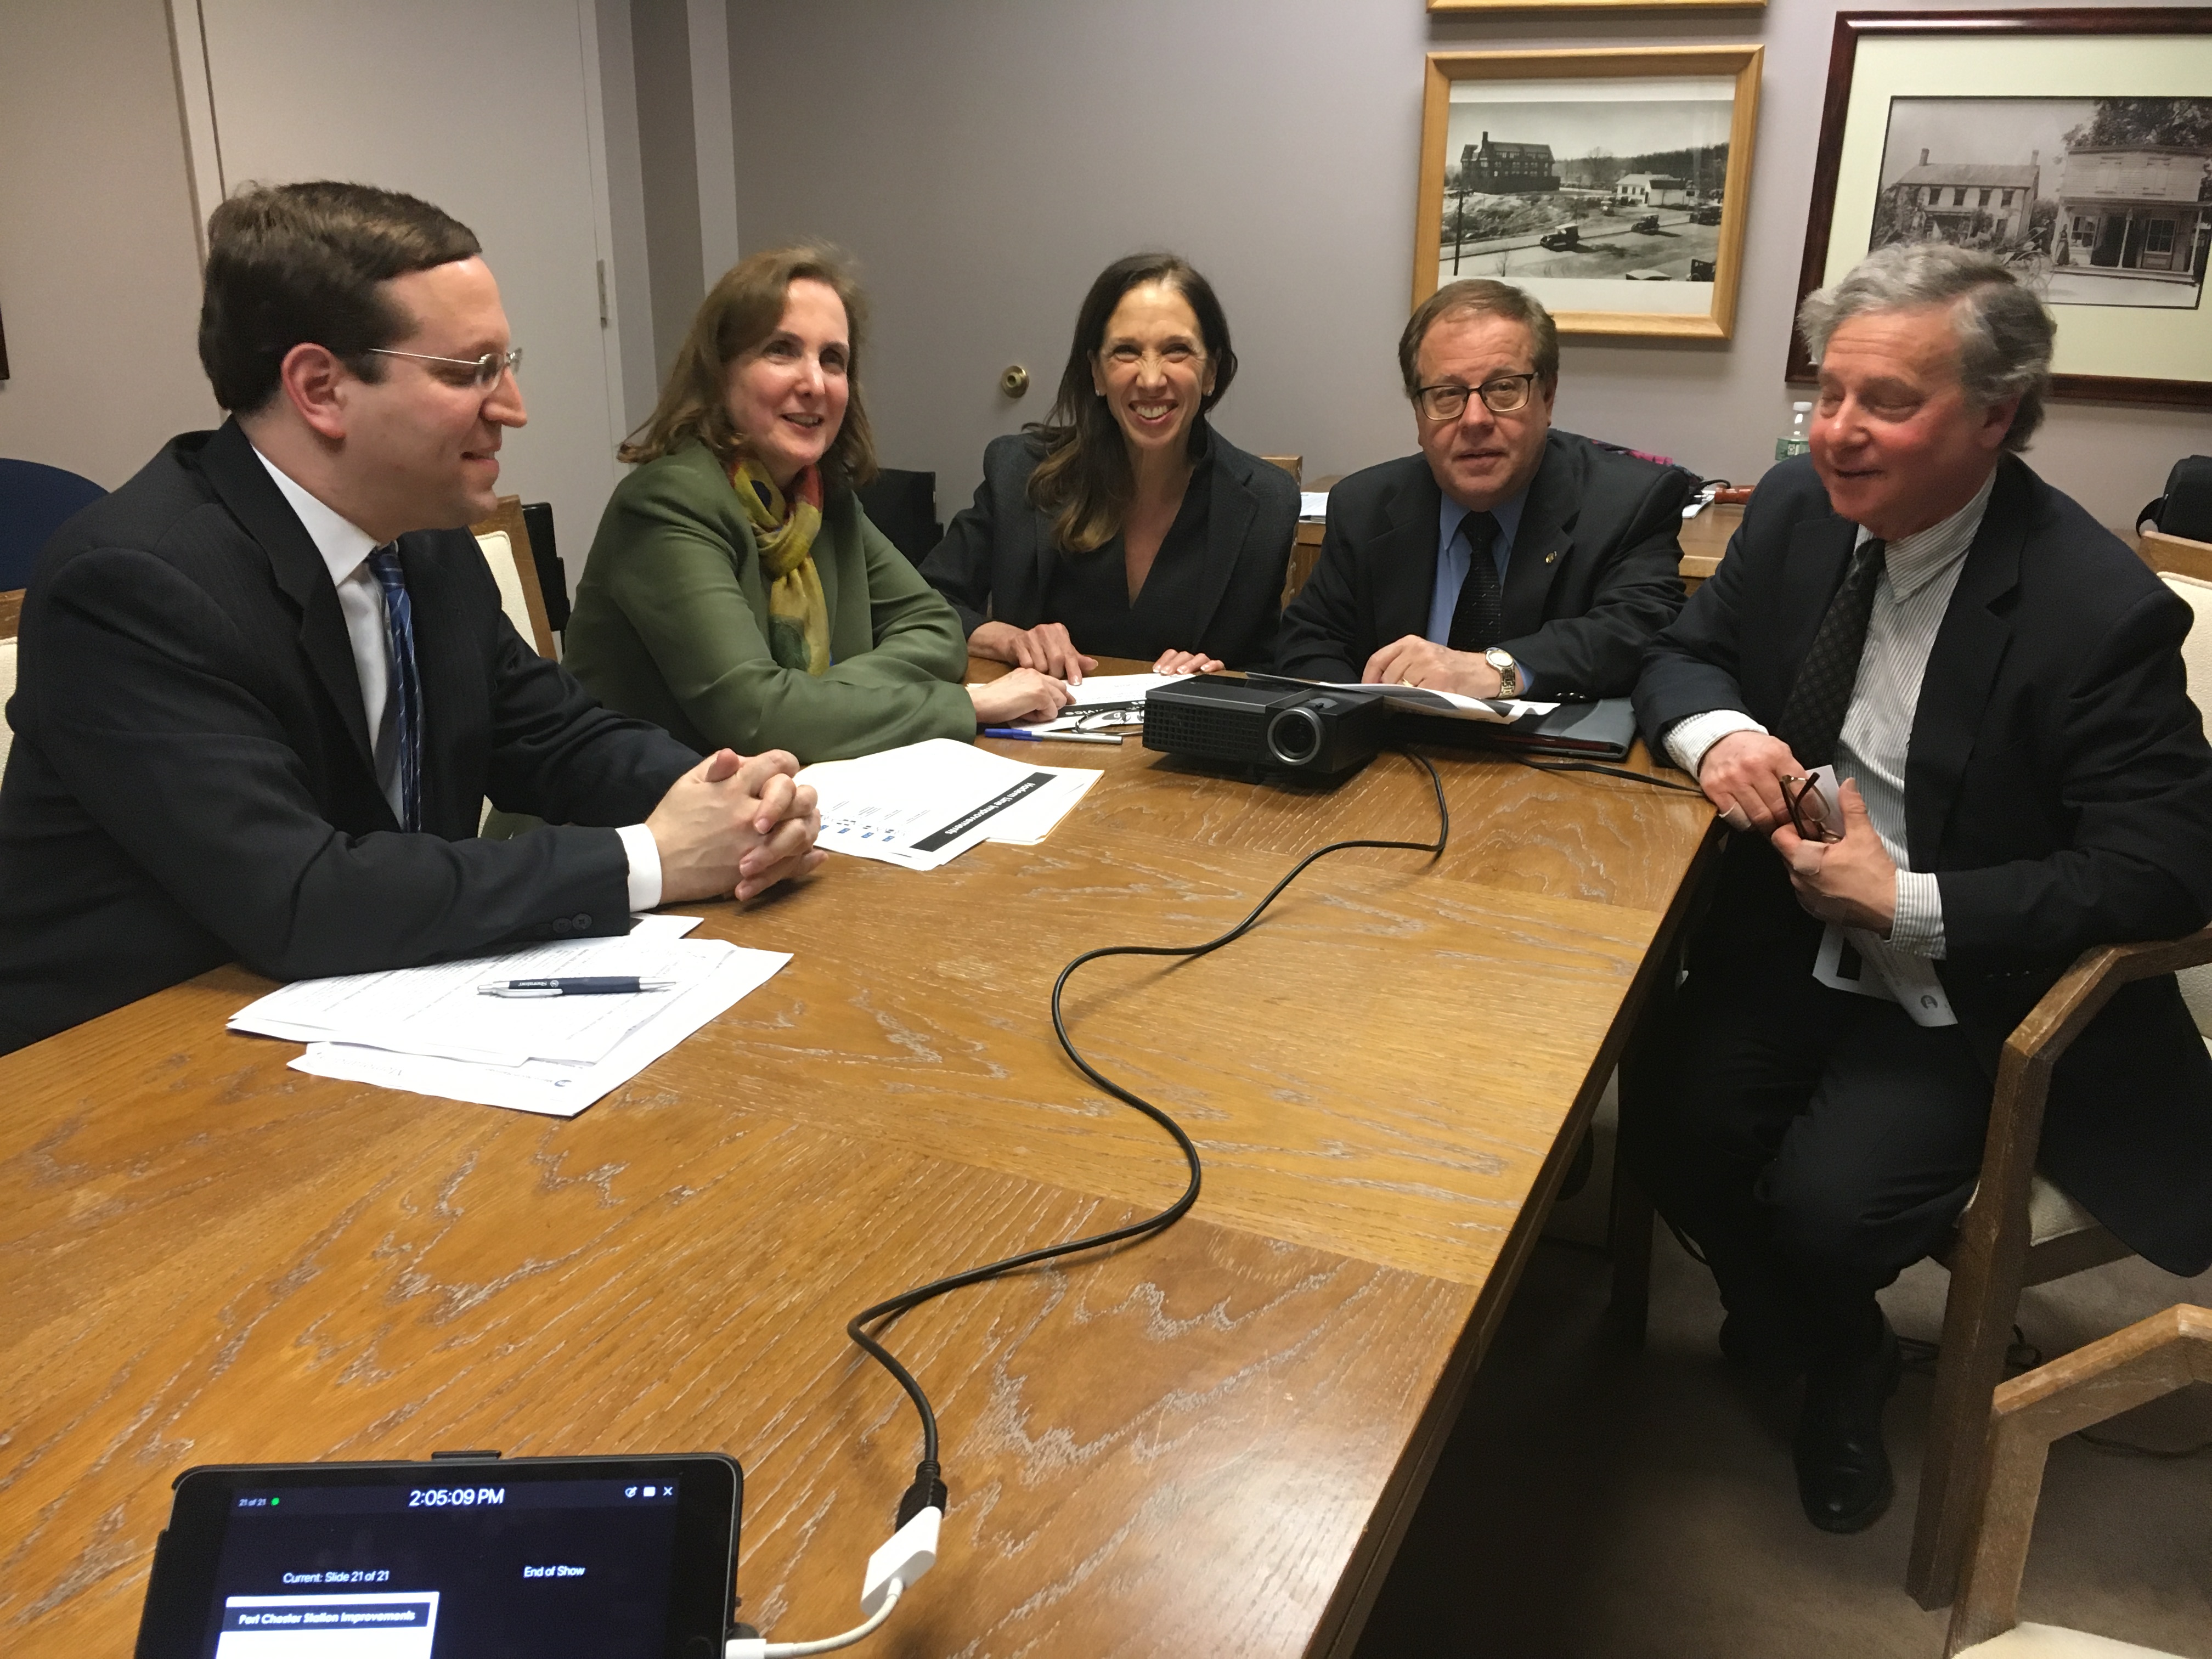 As Chair of the Committee on Corporations, Authorities, and Commissions, Assemblymember Amy Paulin convened a meeting with Catherine Rinaldi, the new president of Metro-North Railroad, and the Westche